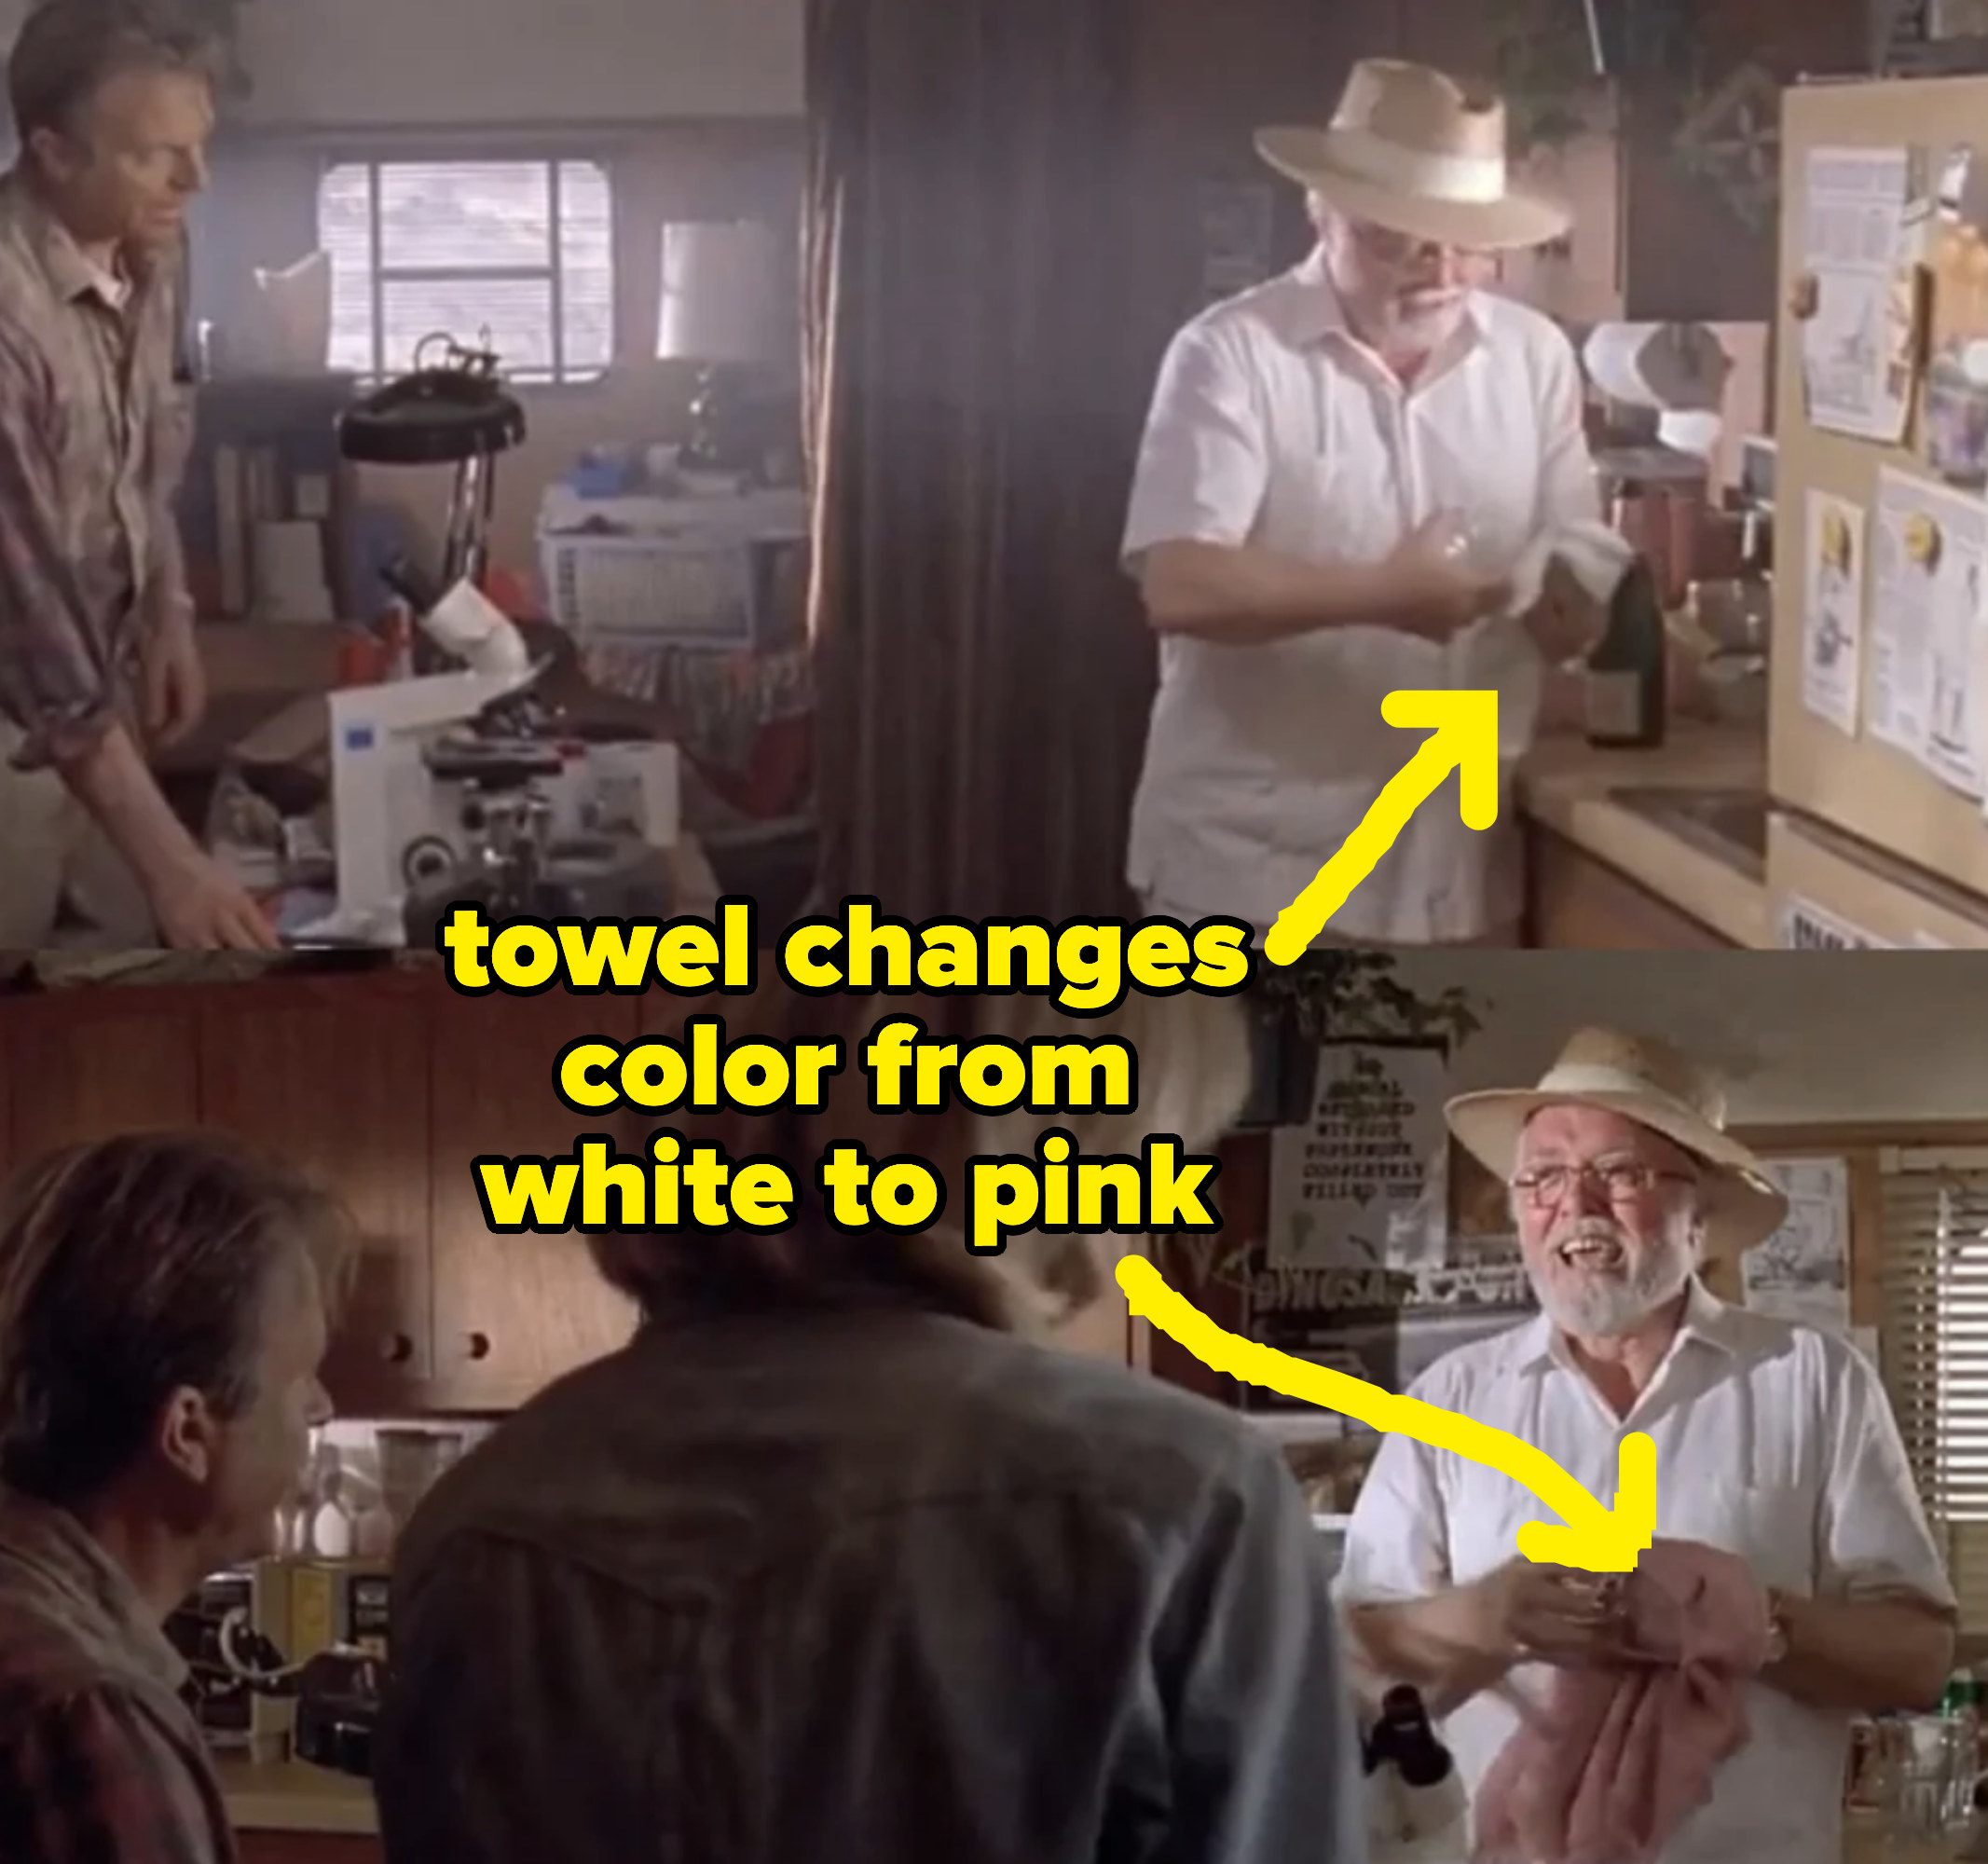 In the same scene, seconds apart, a character is holding a towel that changes color from white to pink